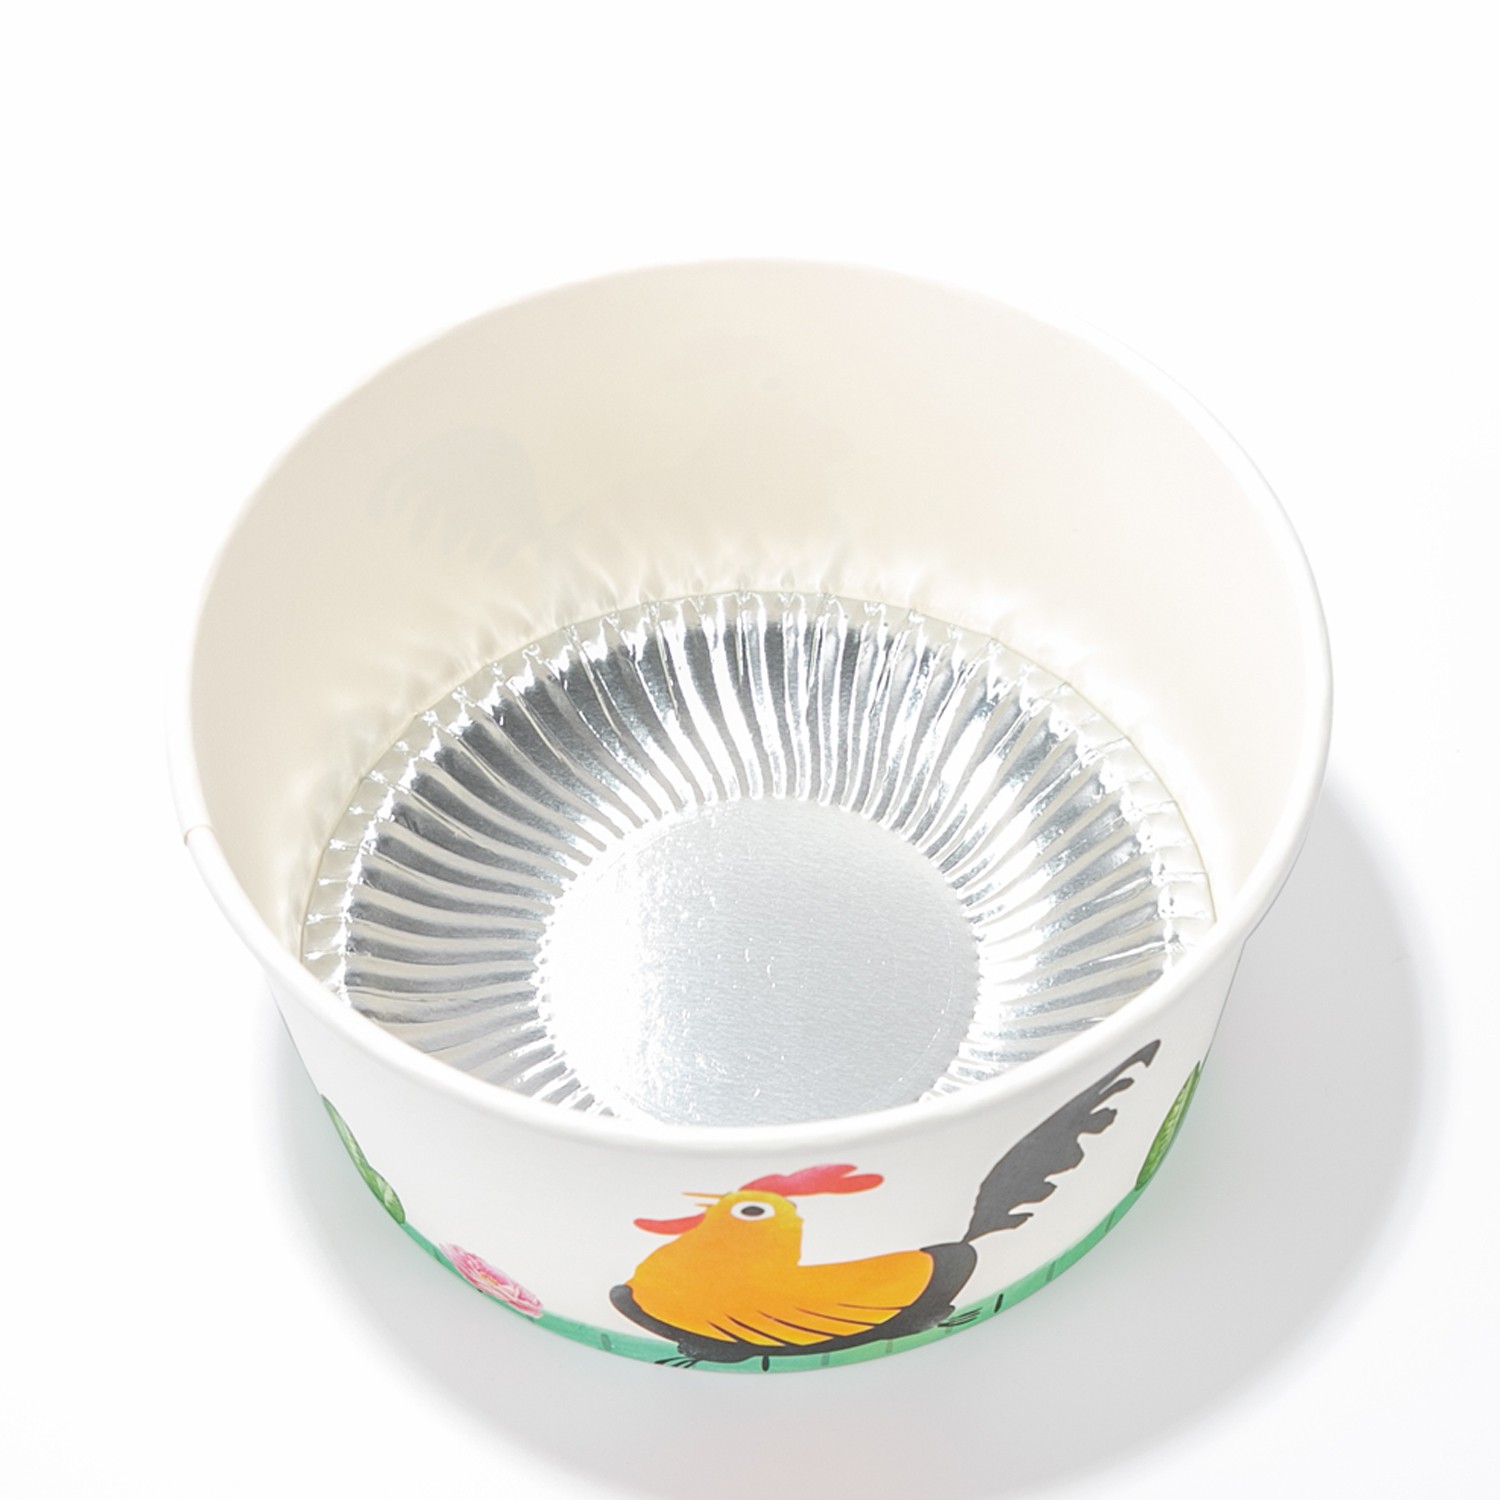 Induction cooker paper bowl